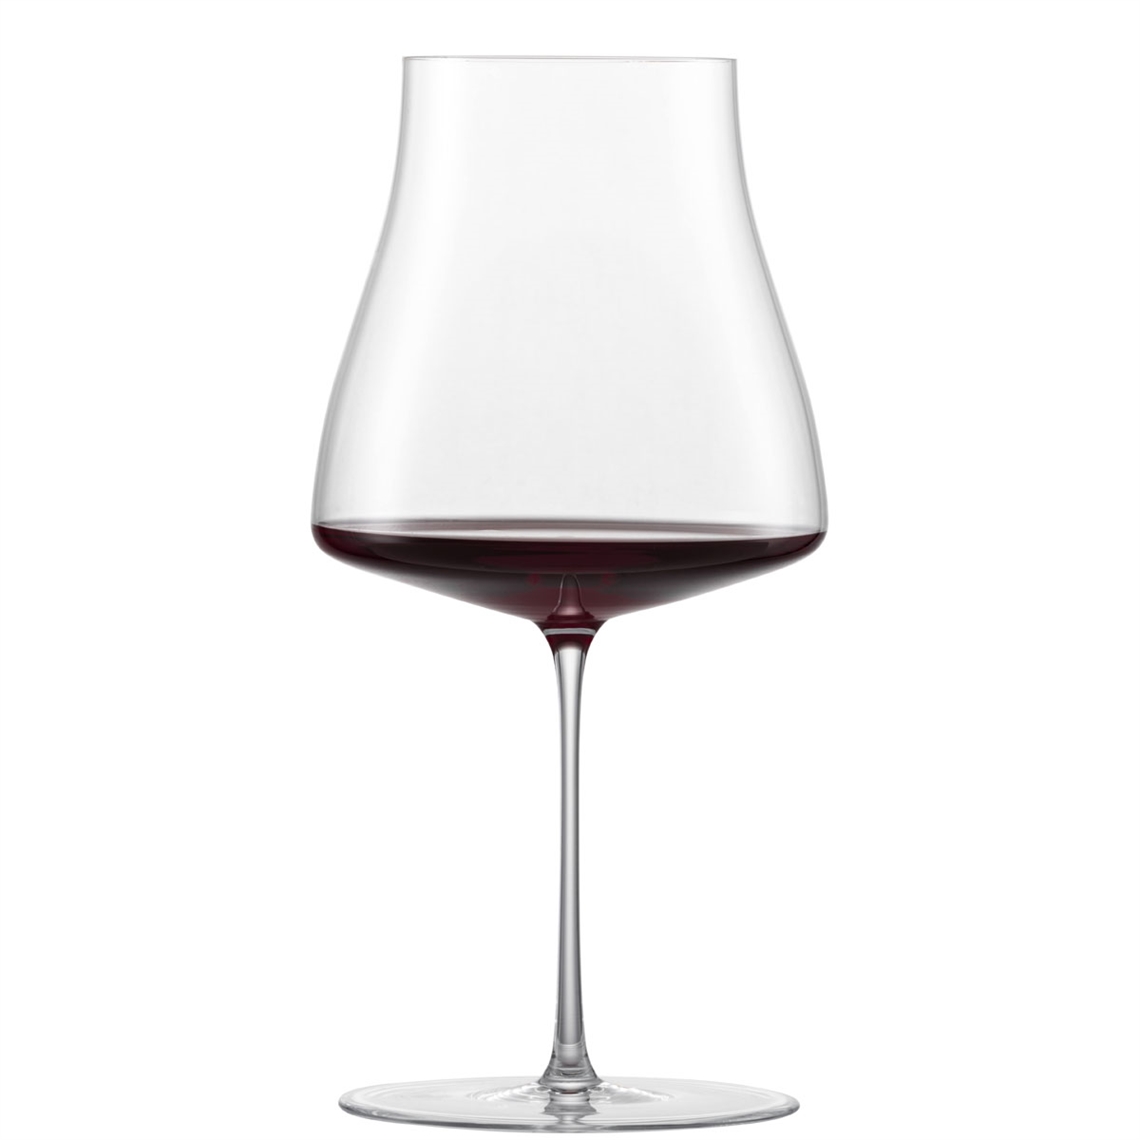 Zwiesel 1872 The Moment Pinot Noir Glass - Set of 2